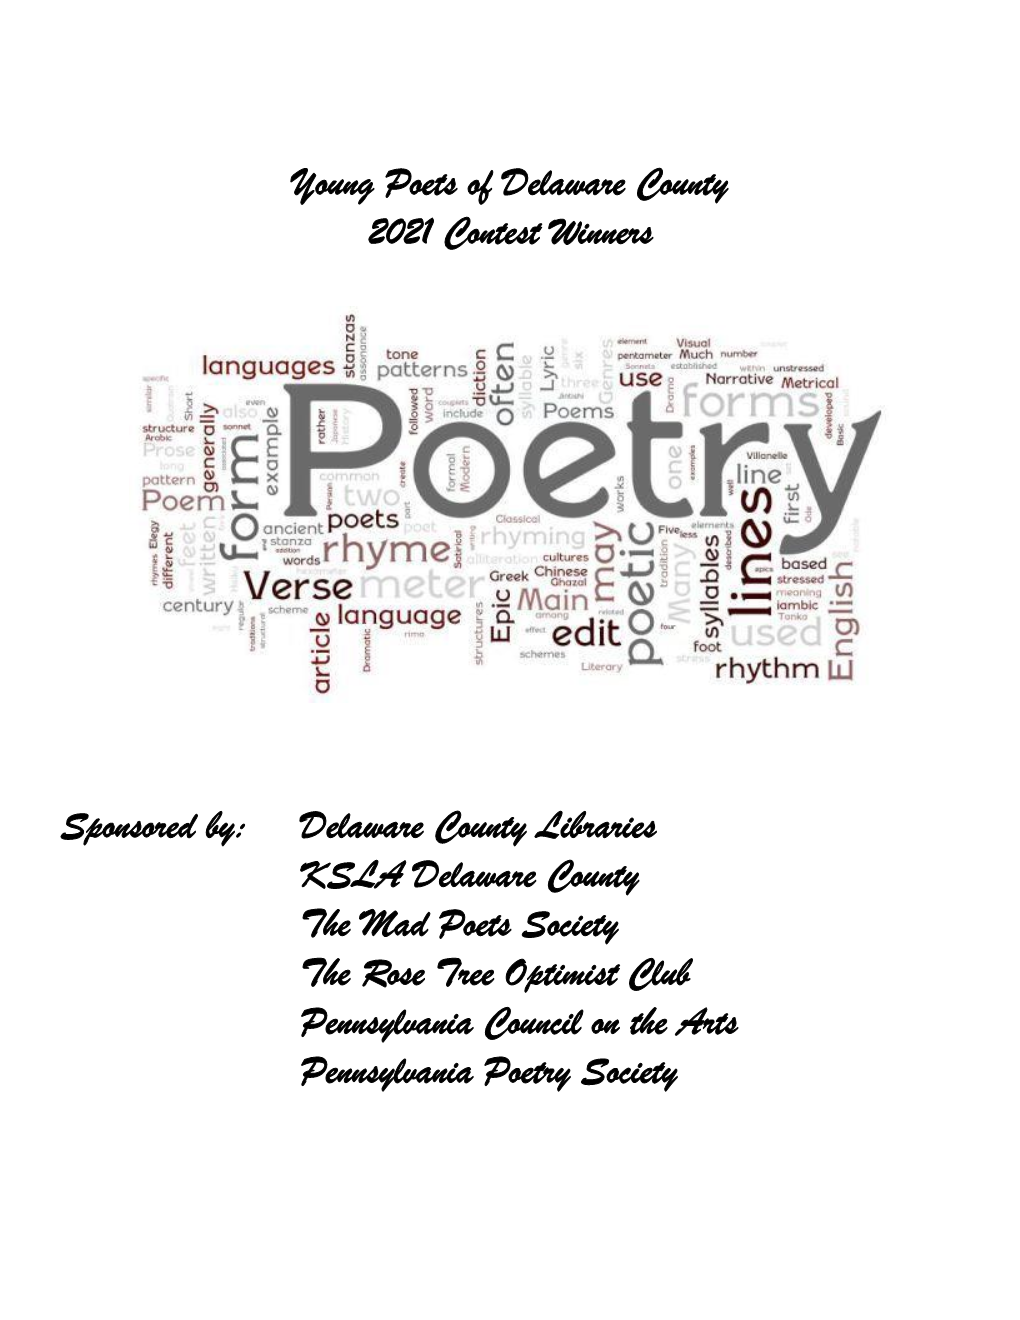 Young Poets of Delaware County 2021 Contest Winners Sponsored By